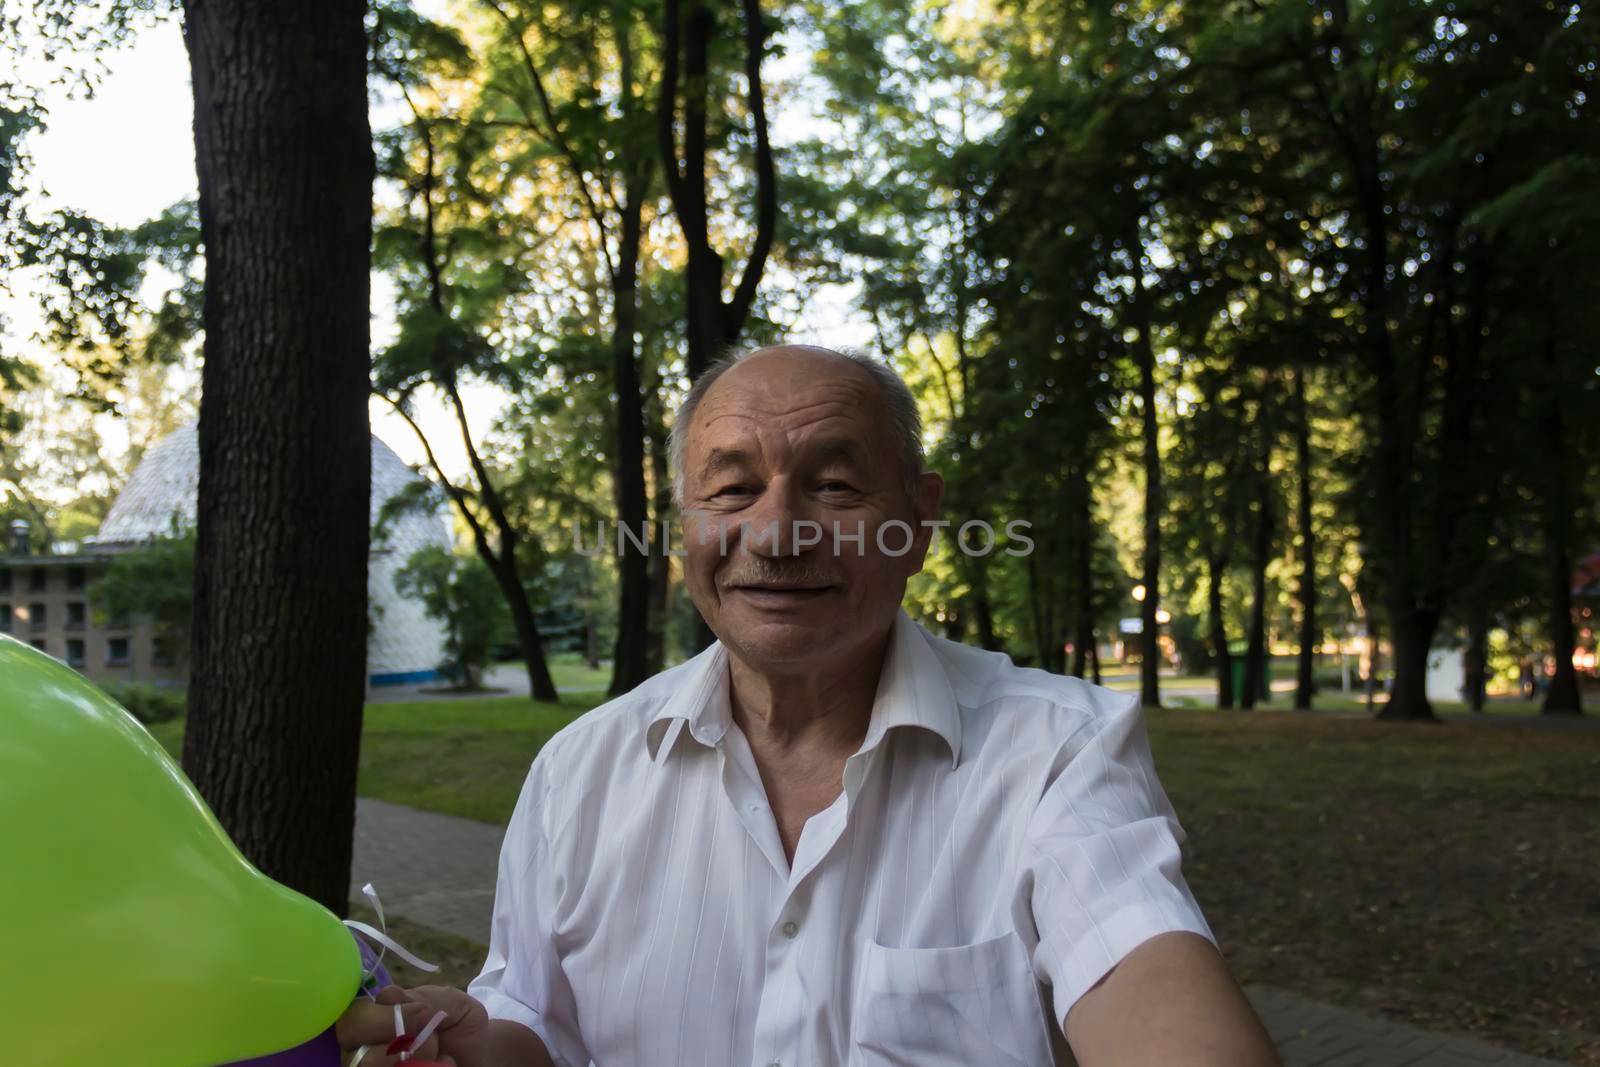 An elderly man with a smile on his face and bright balloons makes a selfie in the park by Alla_Yurtayeva